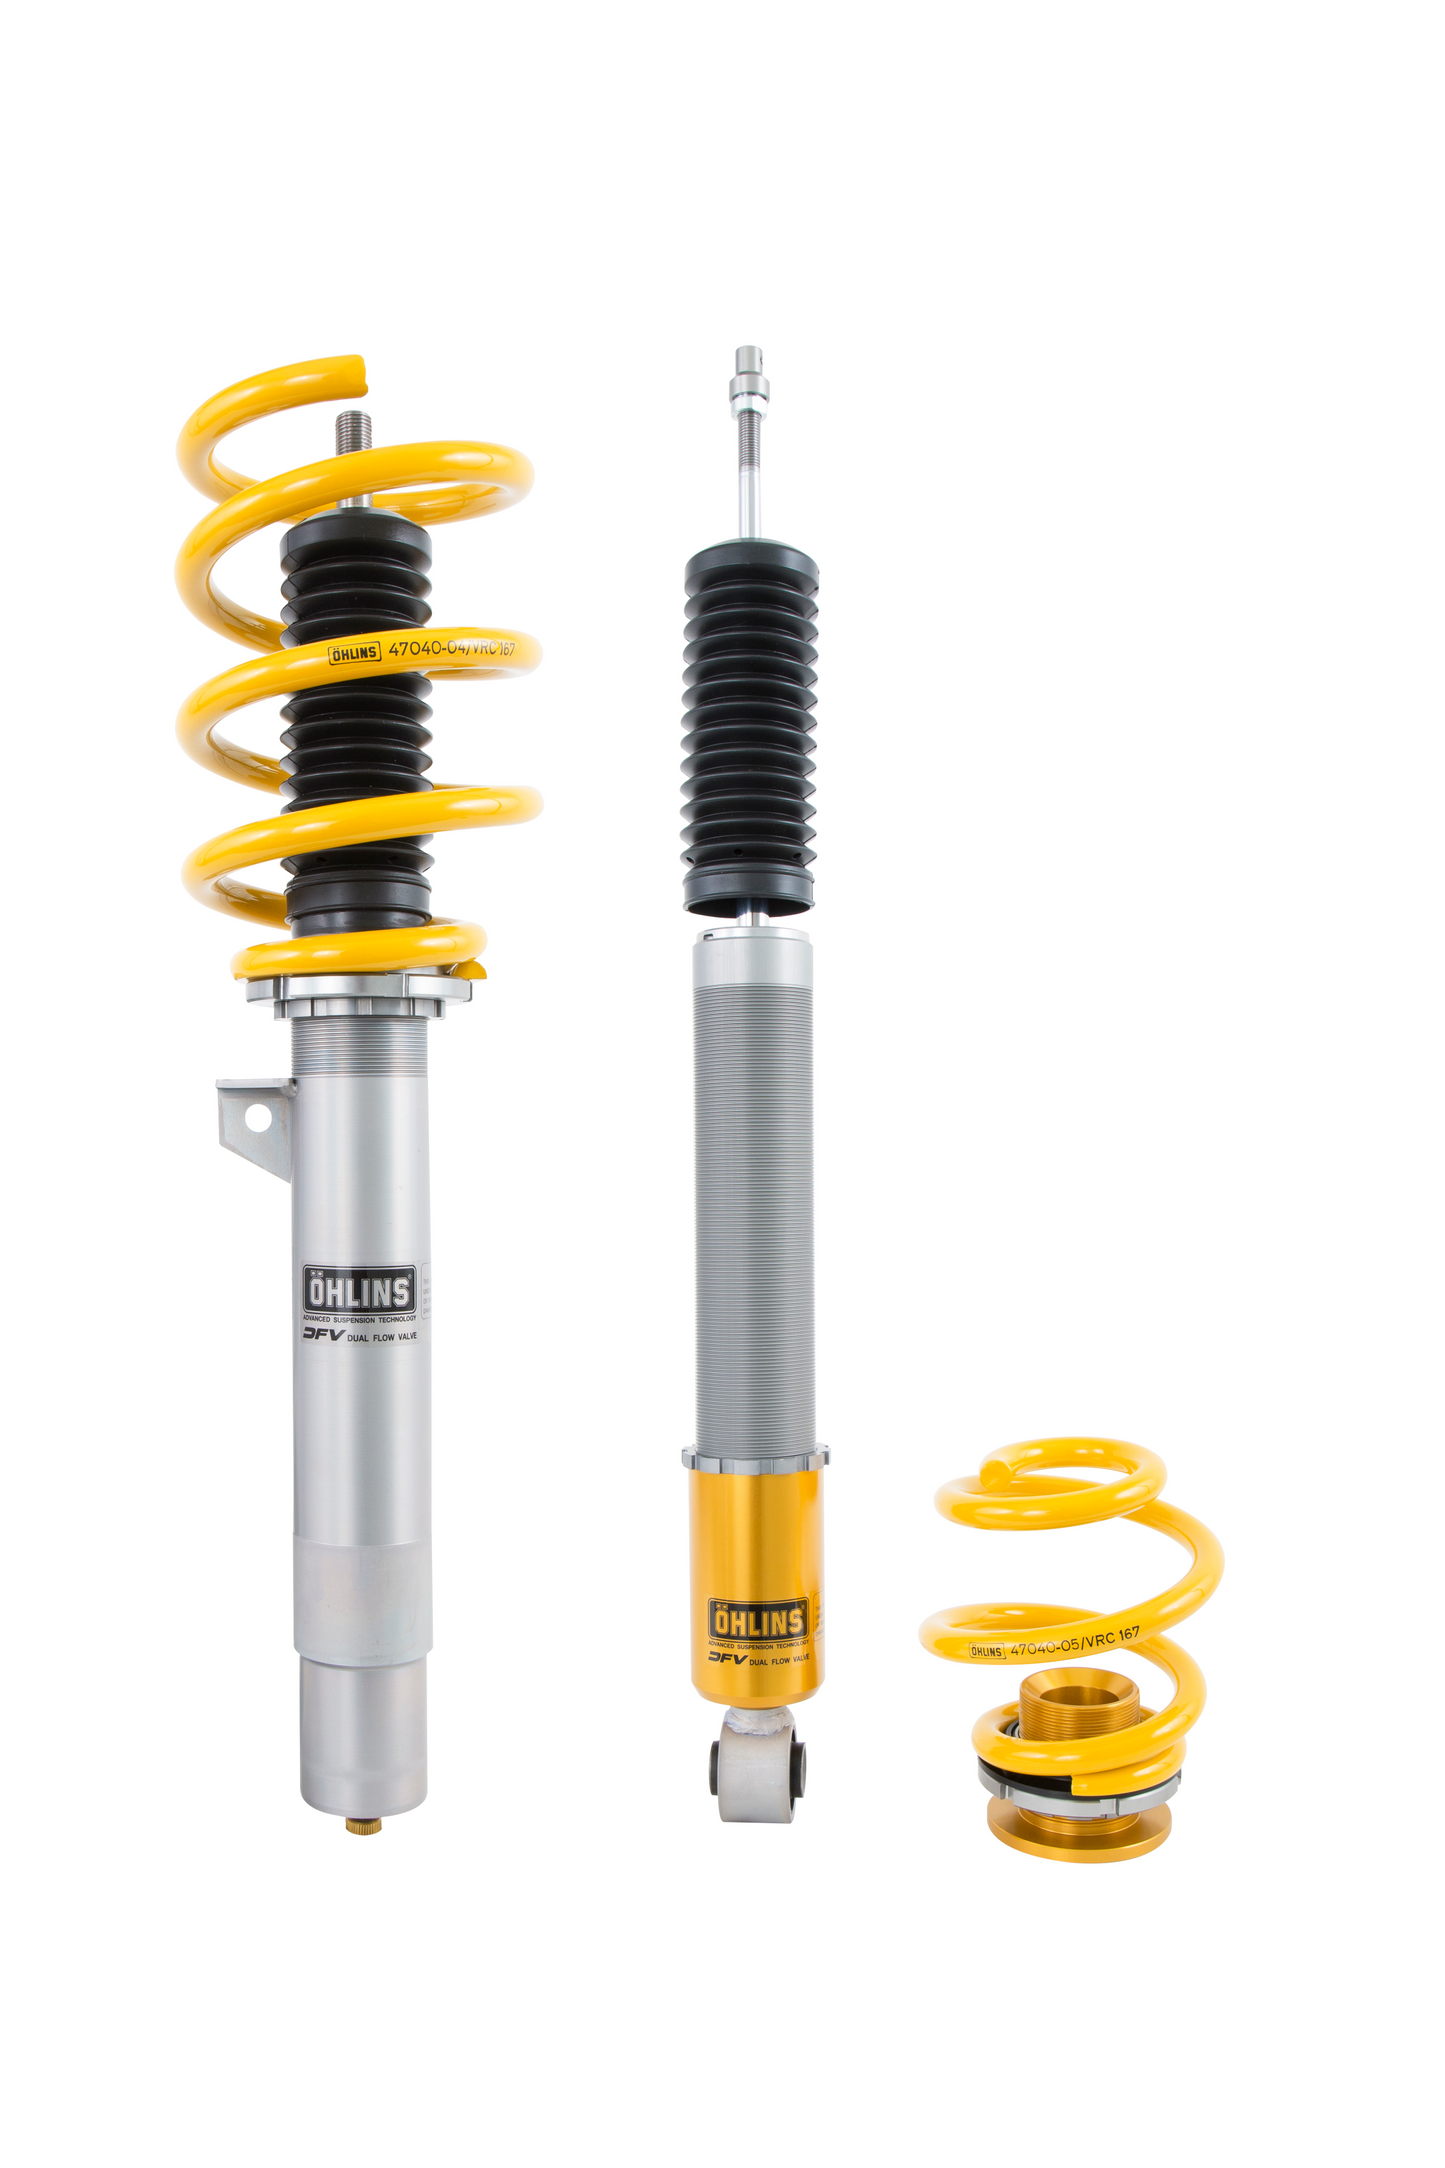 OHLINS BMS MI30S1 Road and Track Coilovers BMW E46 M3 2001-2006 - Include Springs